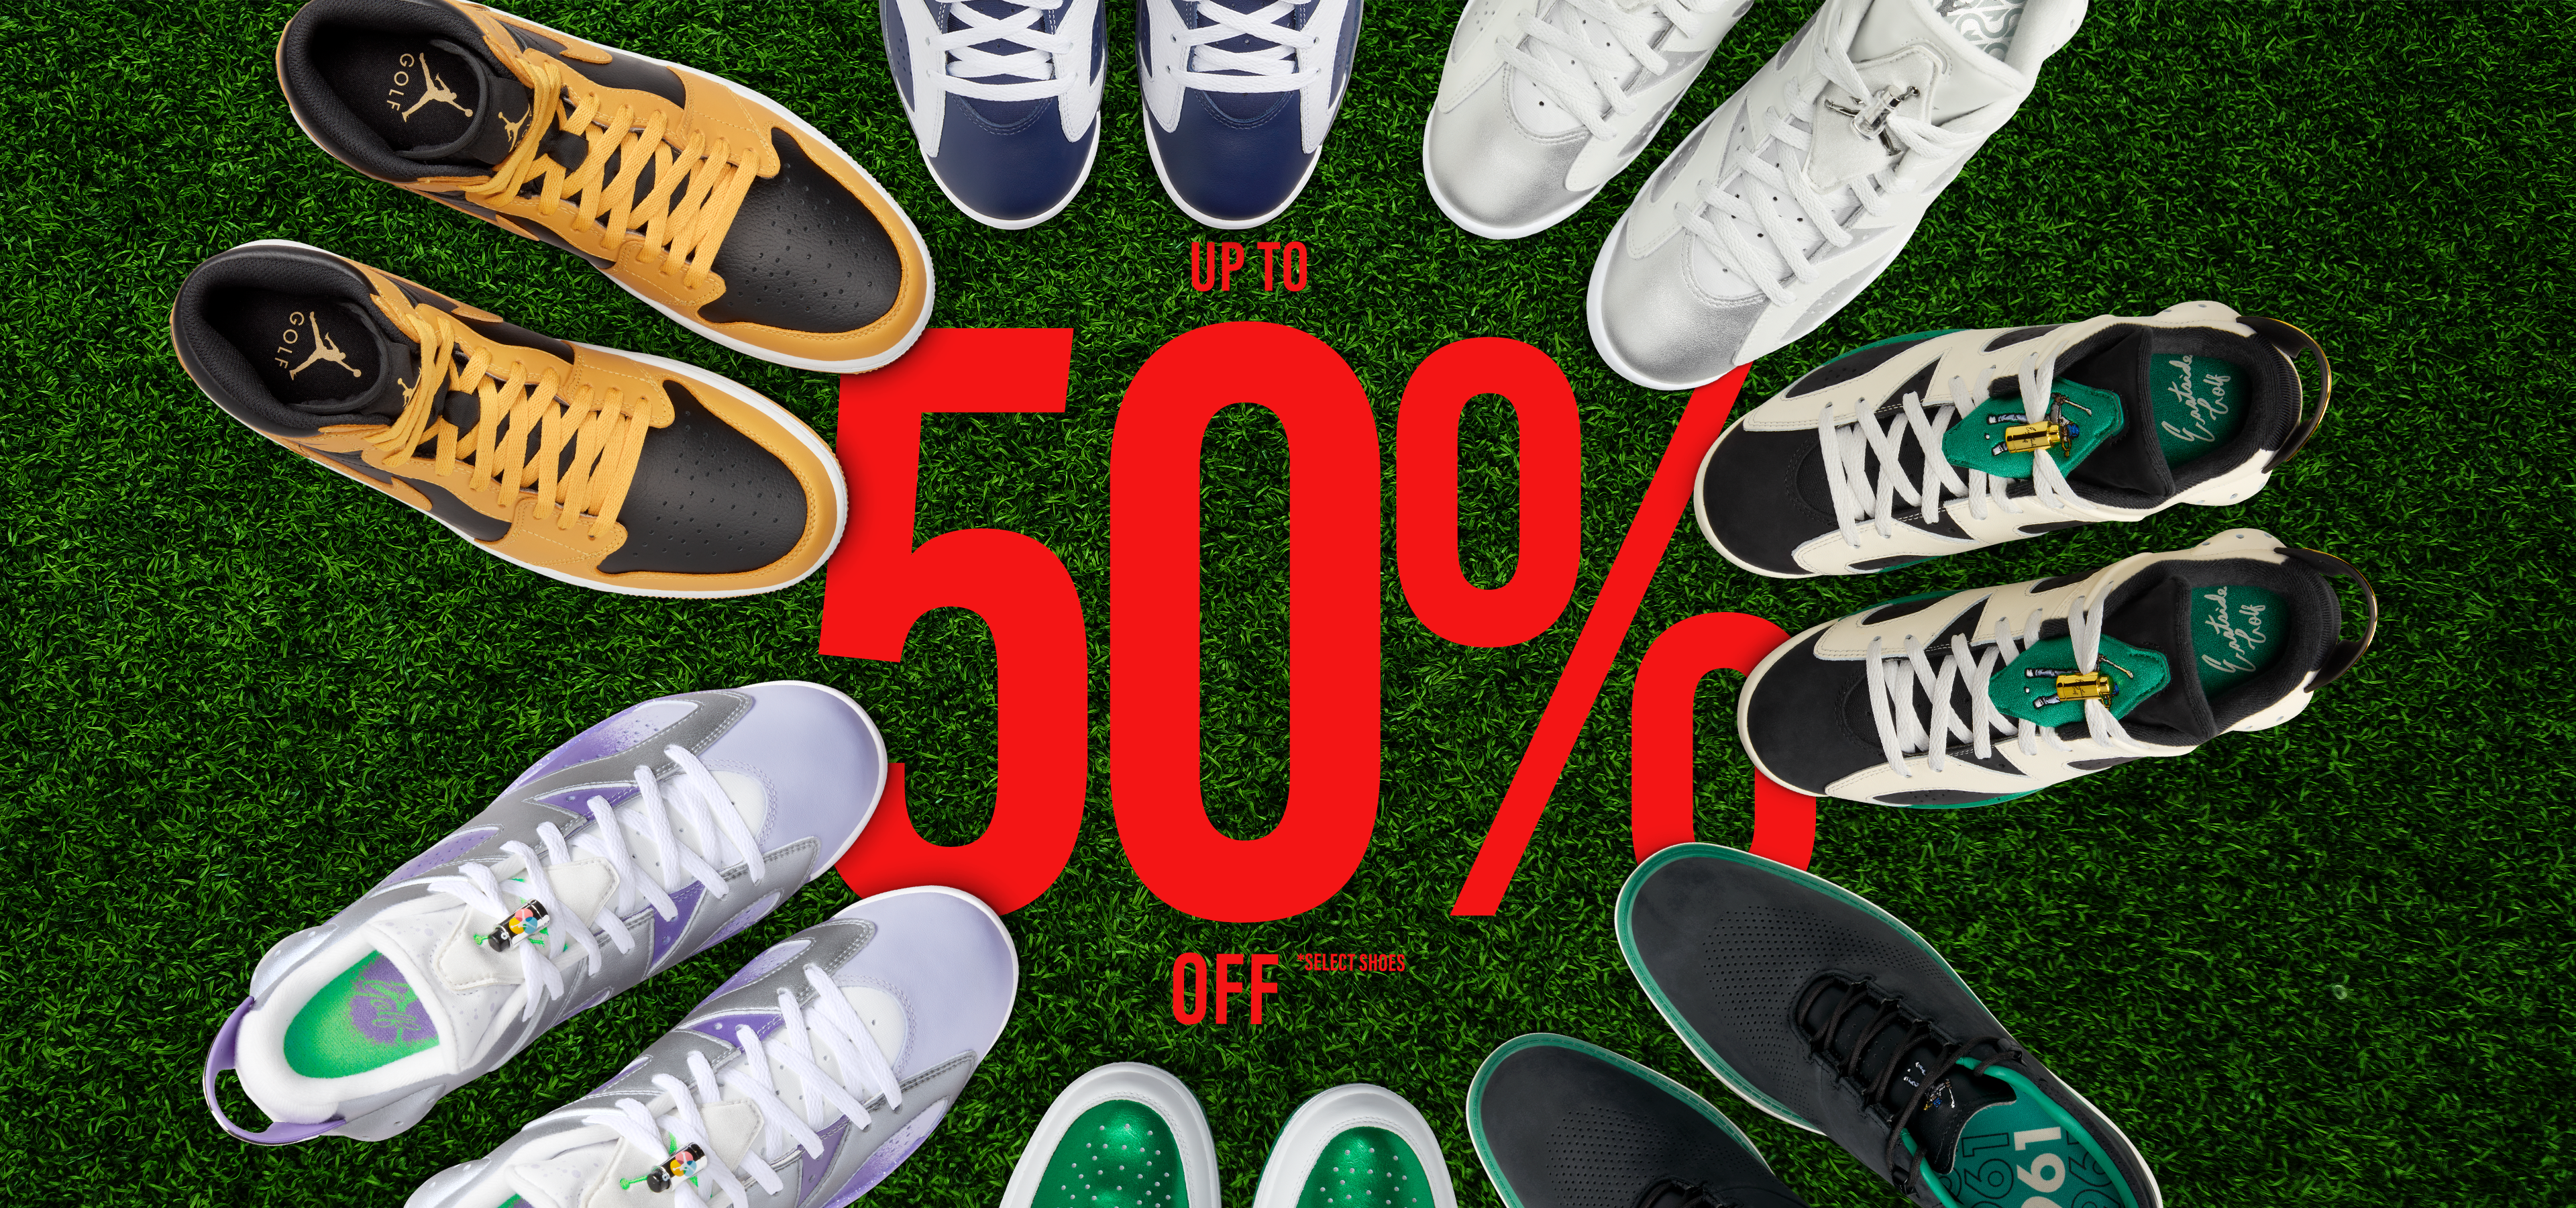 Up to 50% off select shoes. Click to shop now.